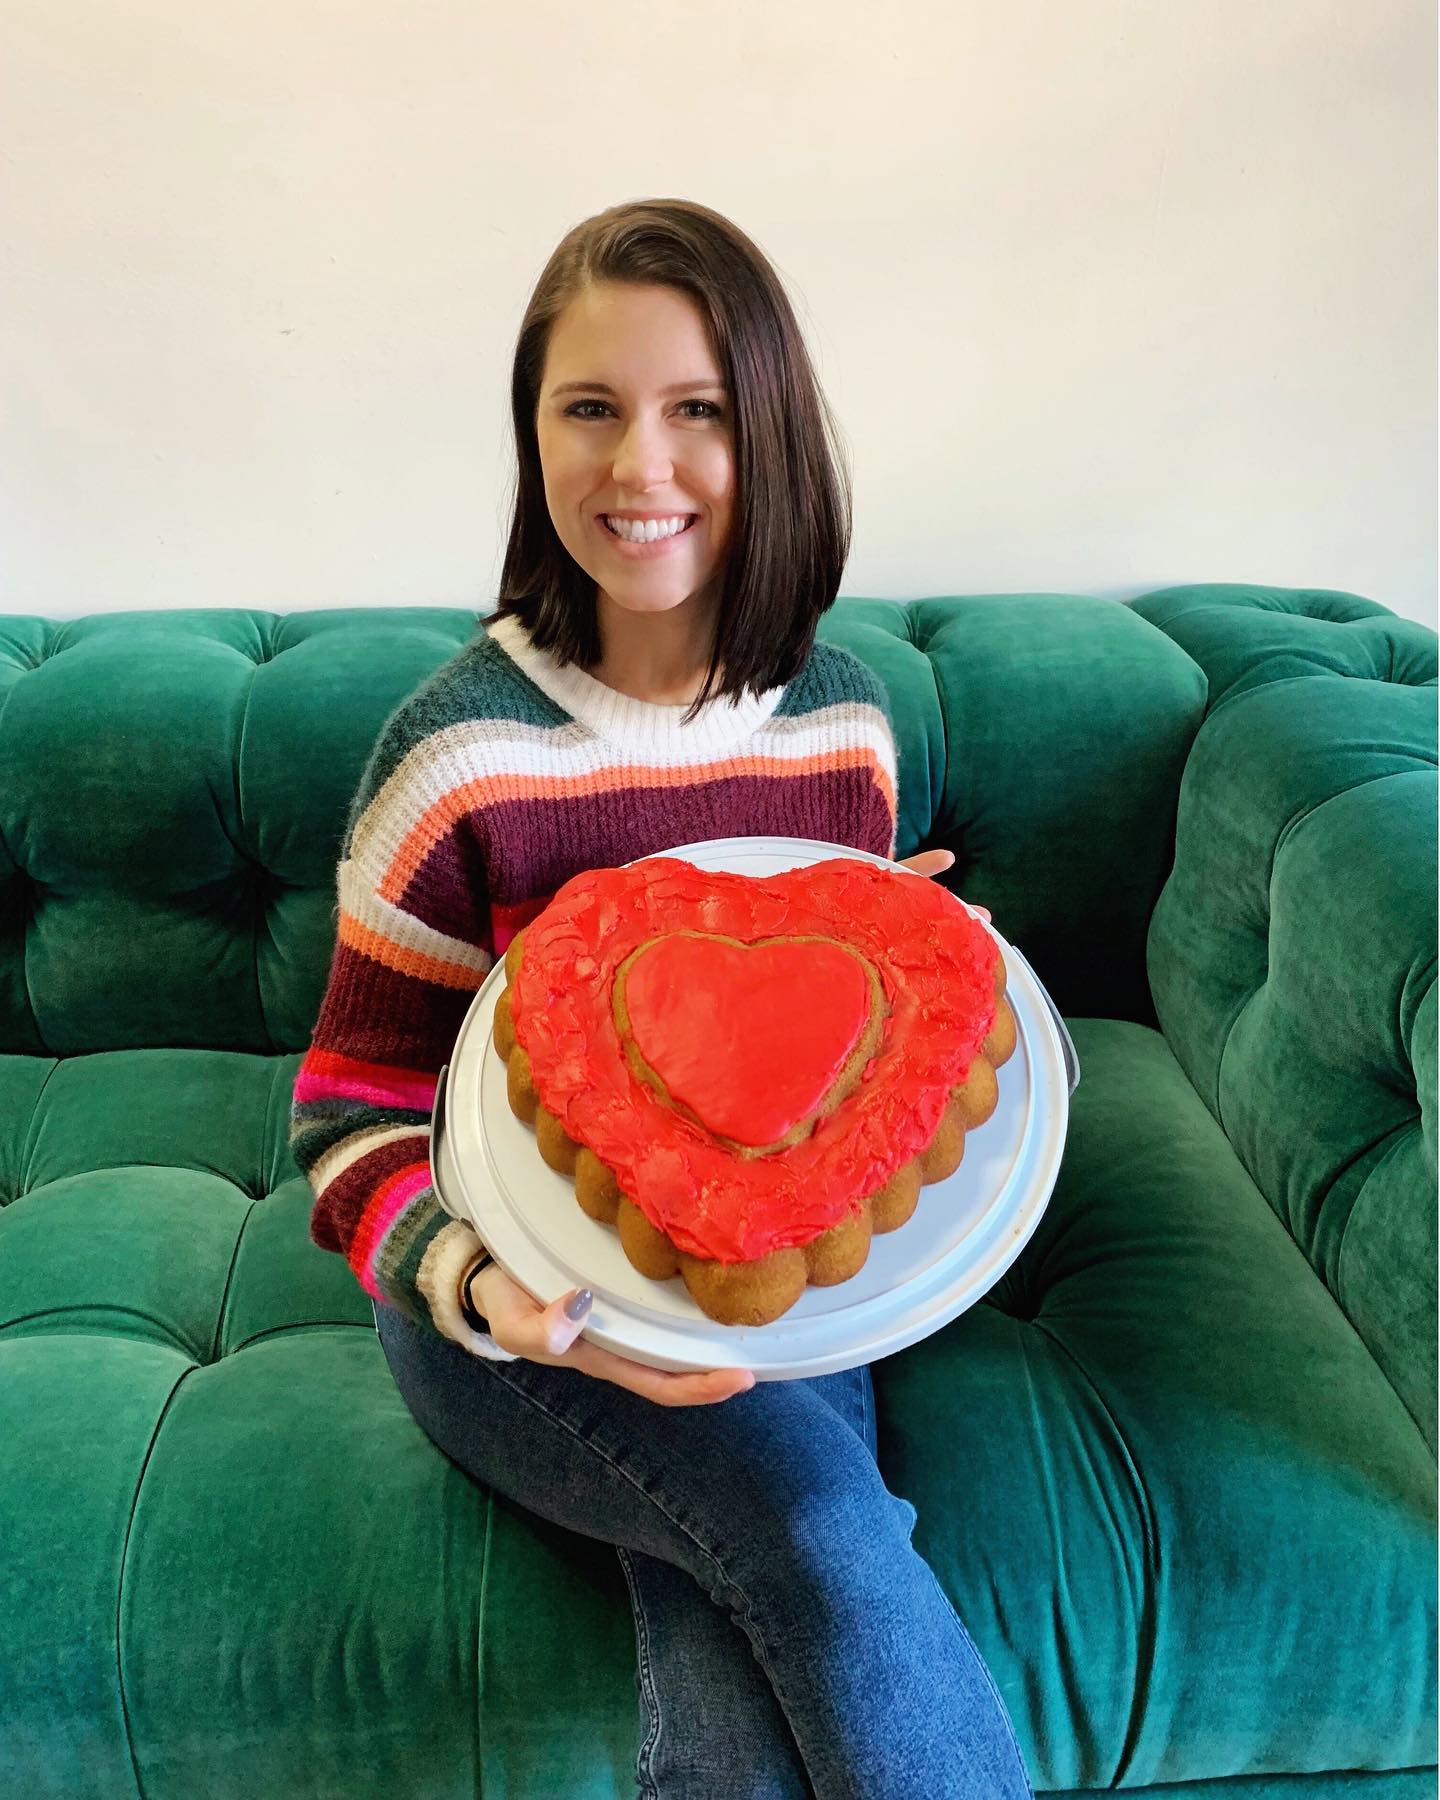 All you need is love. And cake️ Happy Valentine’s Day!